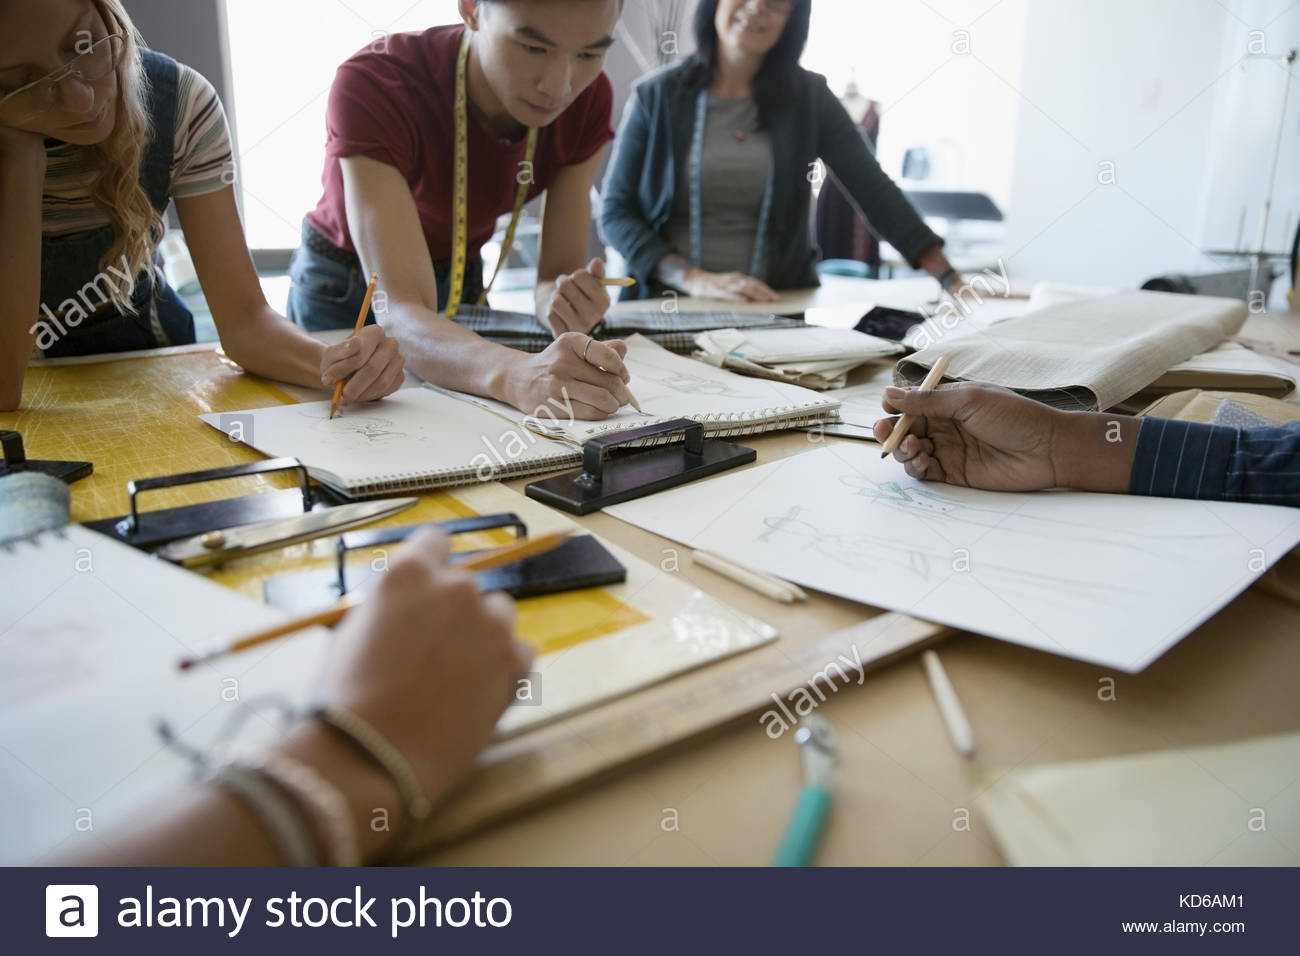 Fashion design students talking, sketching at workbench in studio Stock Photo